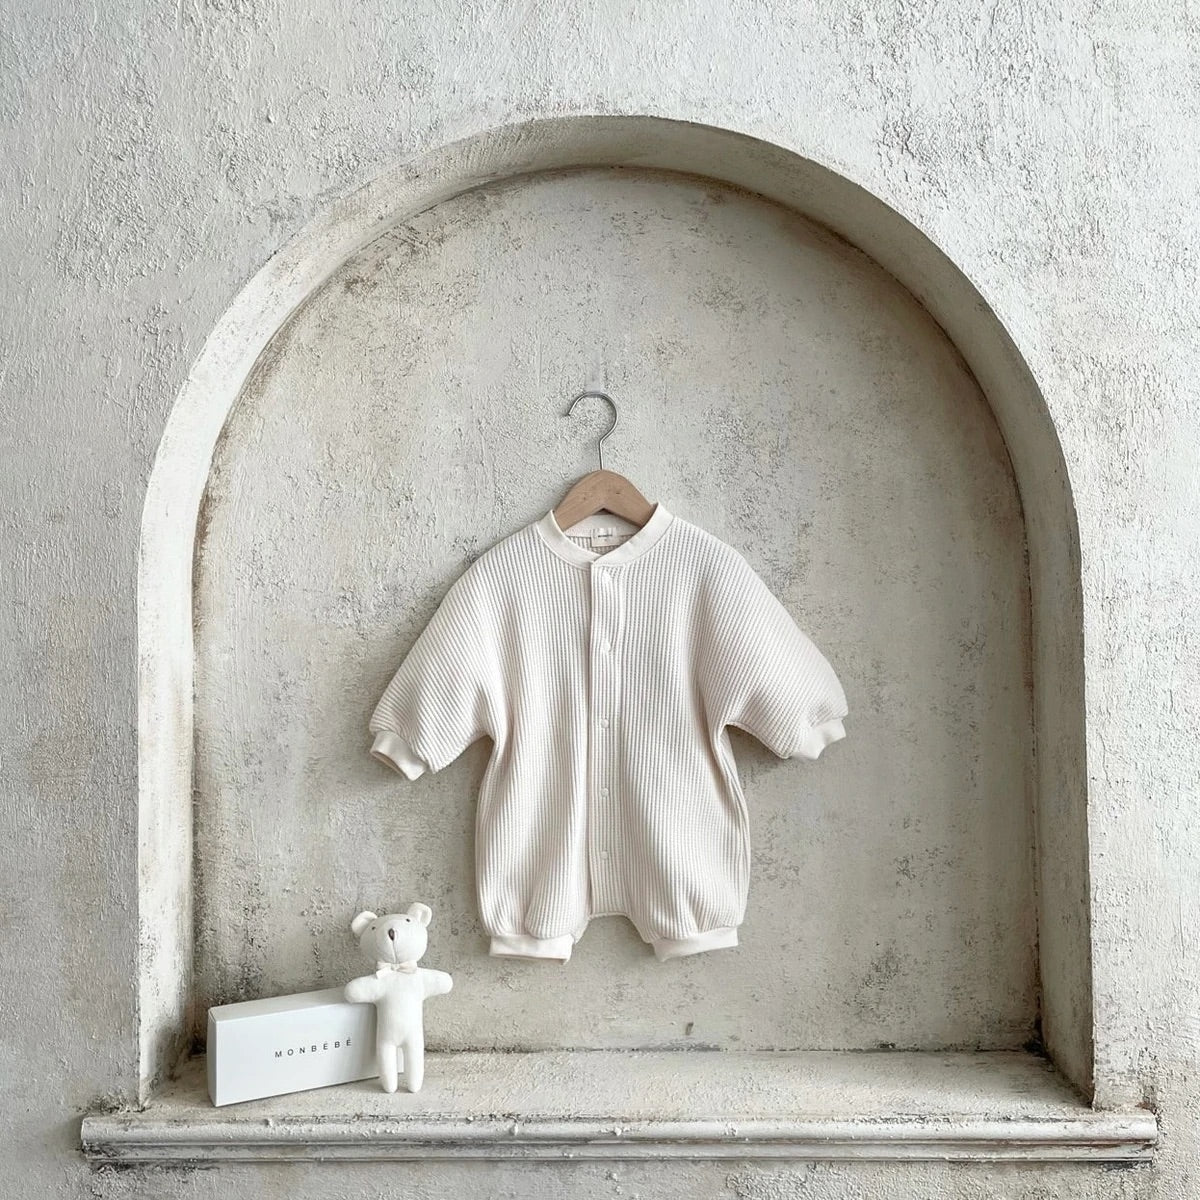 Mini Boxy Waffel Bodysuit find Stylish Fashion for Little People- at Little Foxx Concept Store